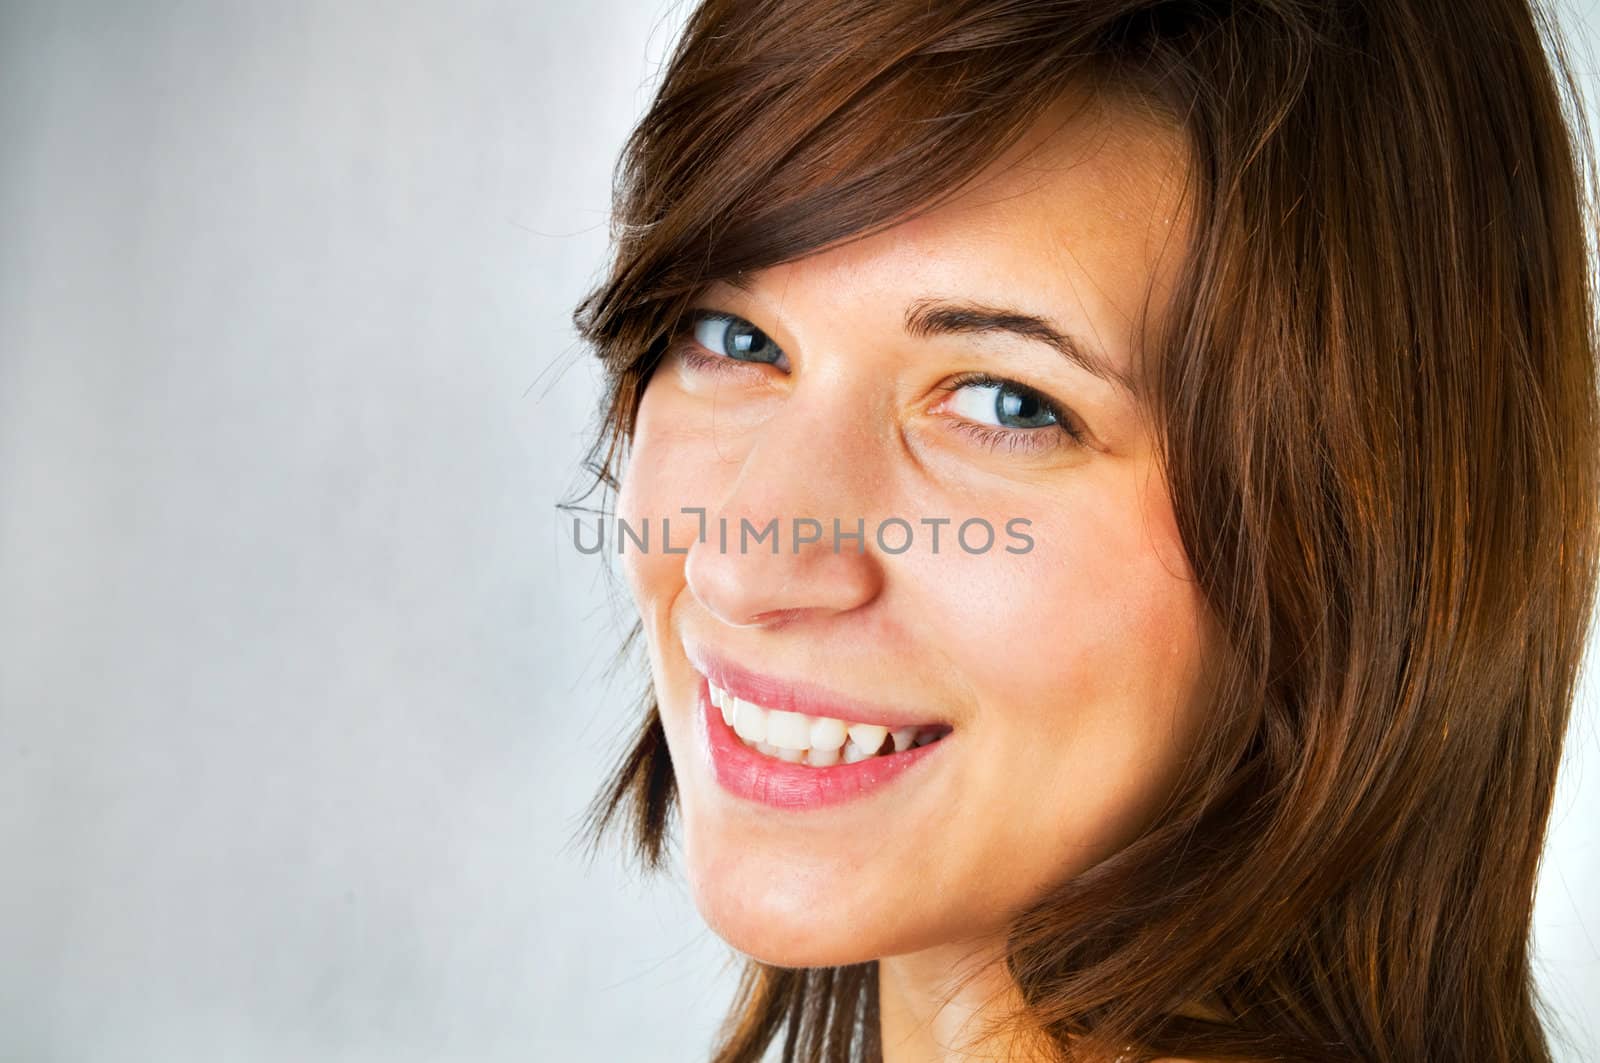 Portrait of young, smiling teenage girl